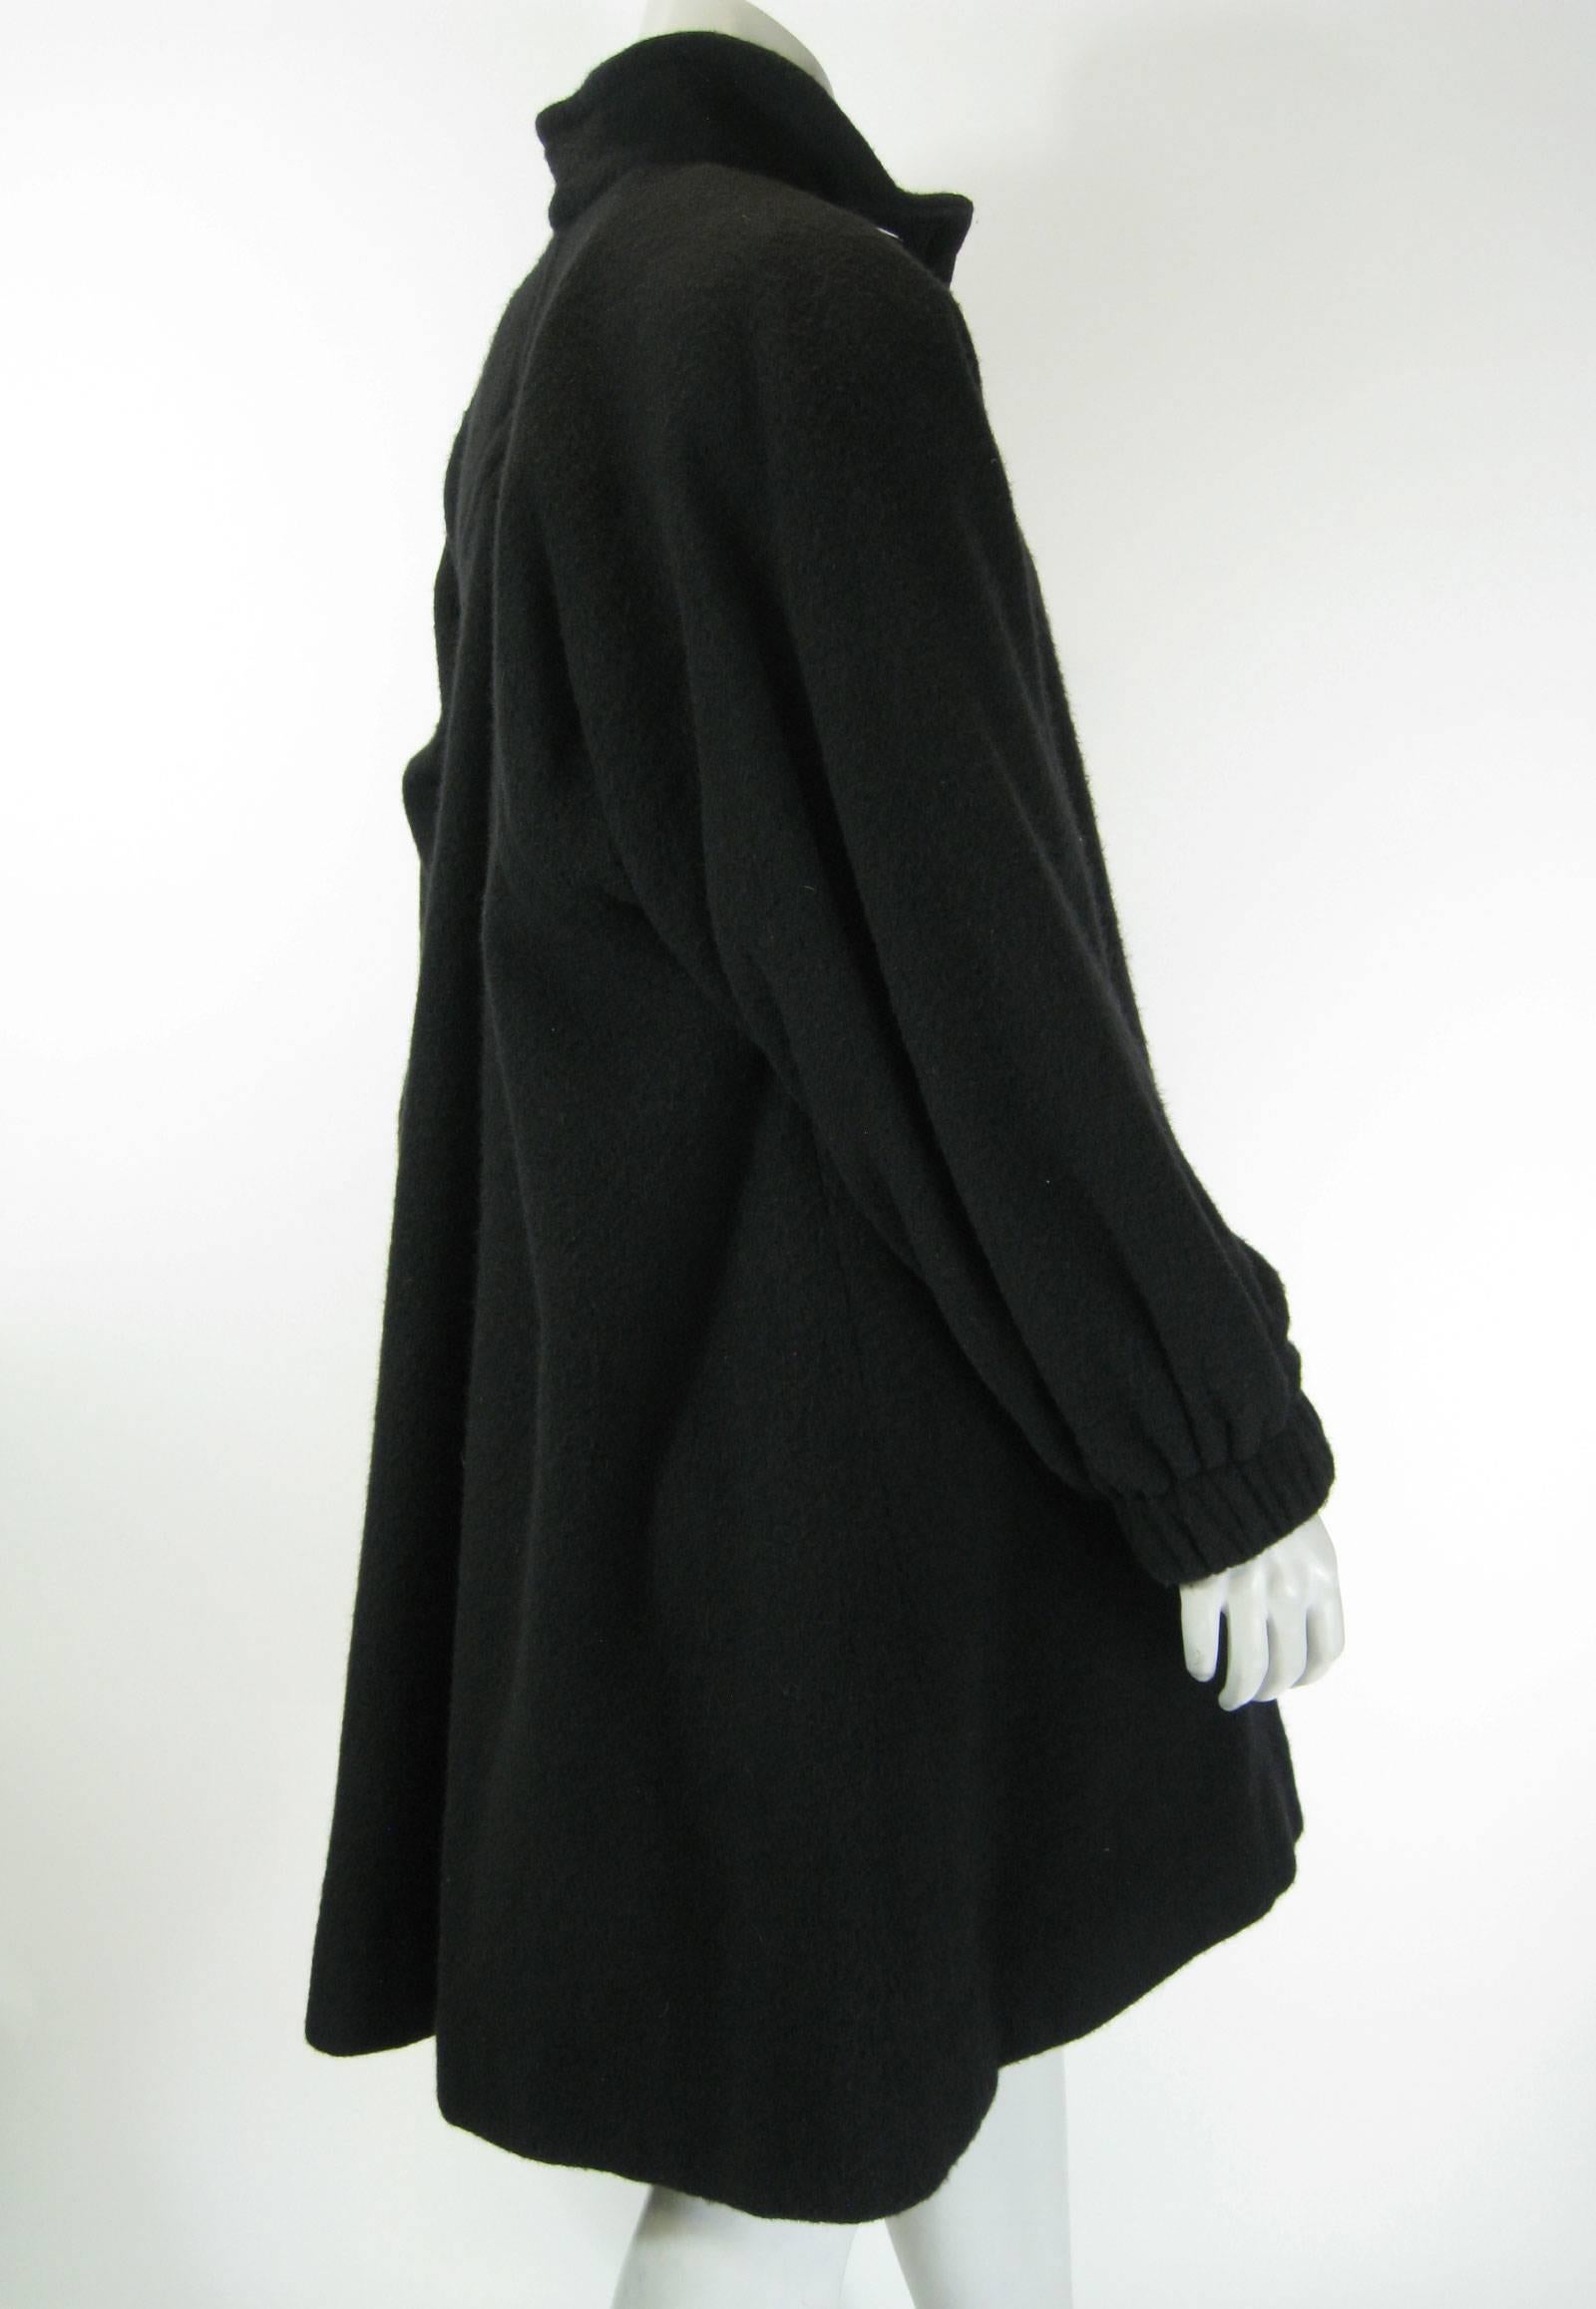 Vintage YSL Rive Gauche black coat.
Oversized a-line swing style.
Oversize buttons.
Fuzzy texture, feels like wool blend.
Elasticized cuffs, sleeves slightly ballooned.
Side slit pockets.
Fully lined.
No size tag found.

Chest: 50